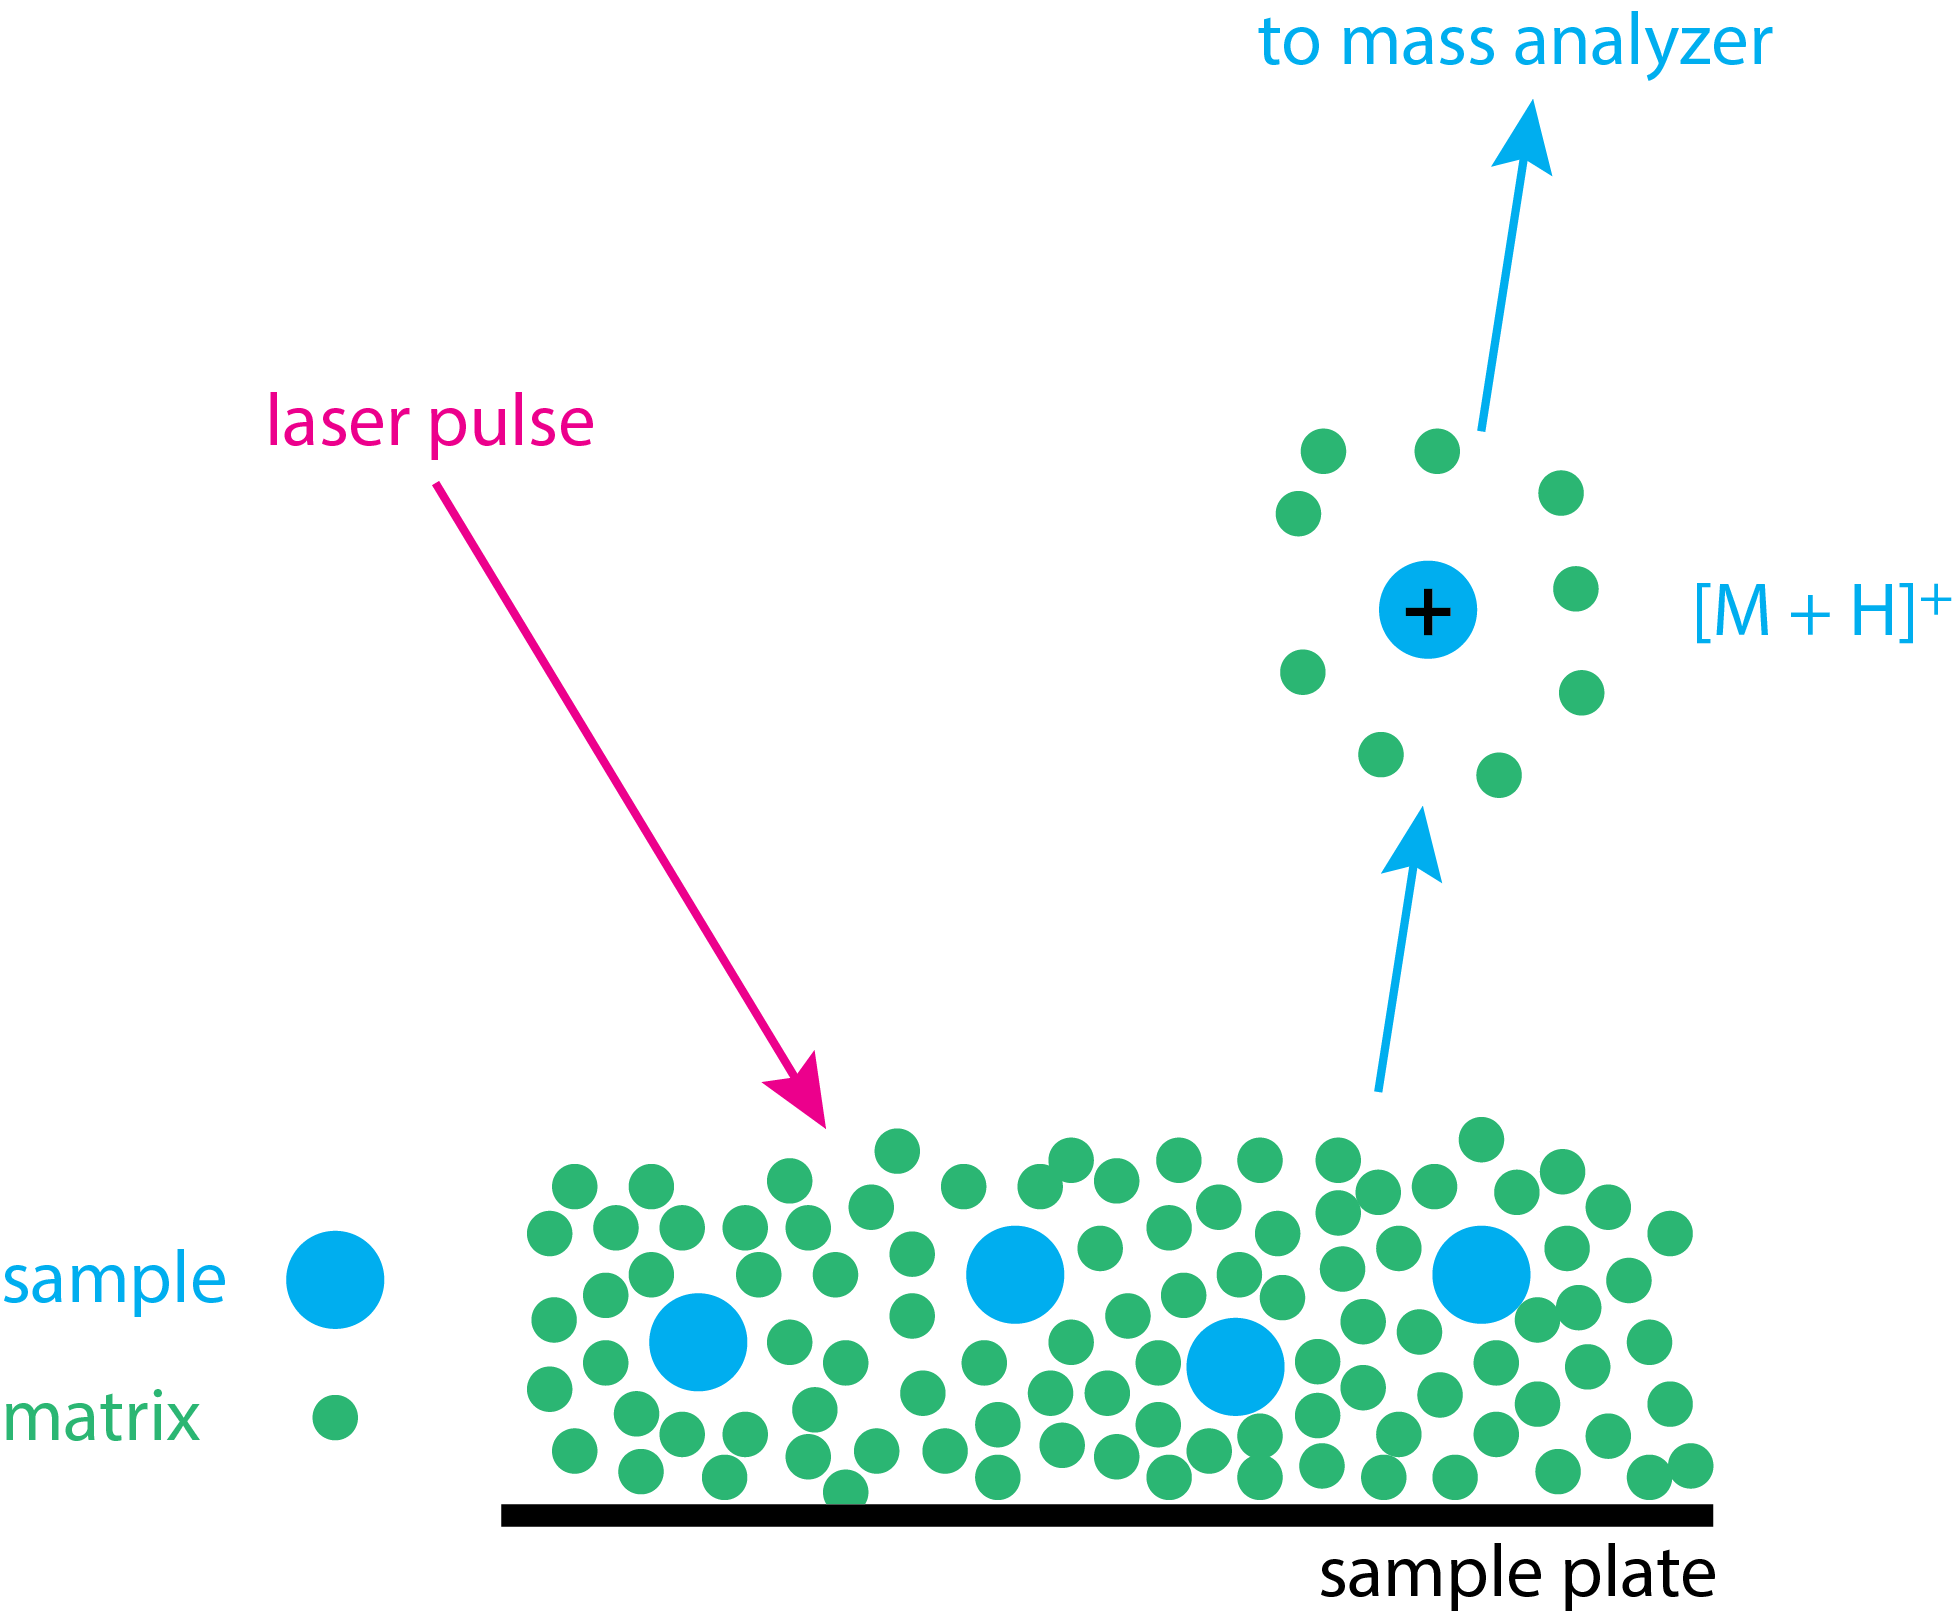 Illustration of matrix-assisted laser desorption ionization. The sample is dispersed in a liquid matrix and then allowed to dry. A pulsed laser beam is used to vaporize and ionize the sample.